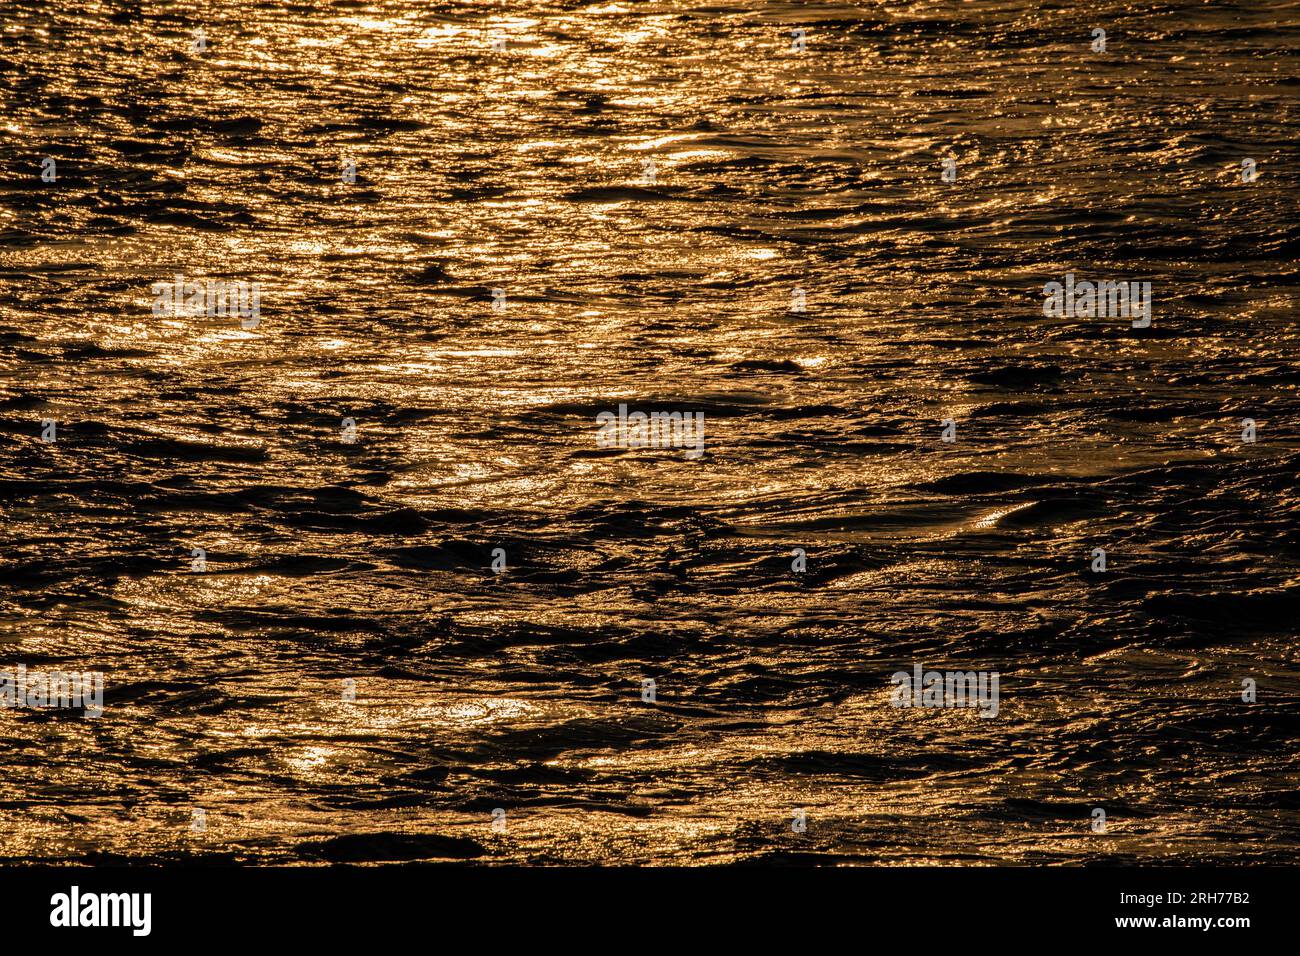 Sun shimmering on the ocean waves at sunset creating a beautiful abstract background Stock Photo